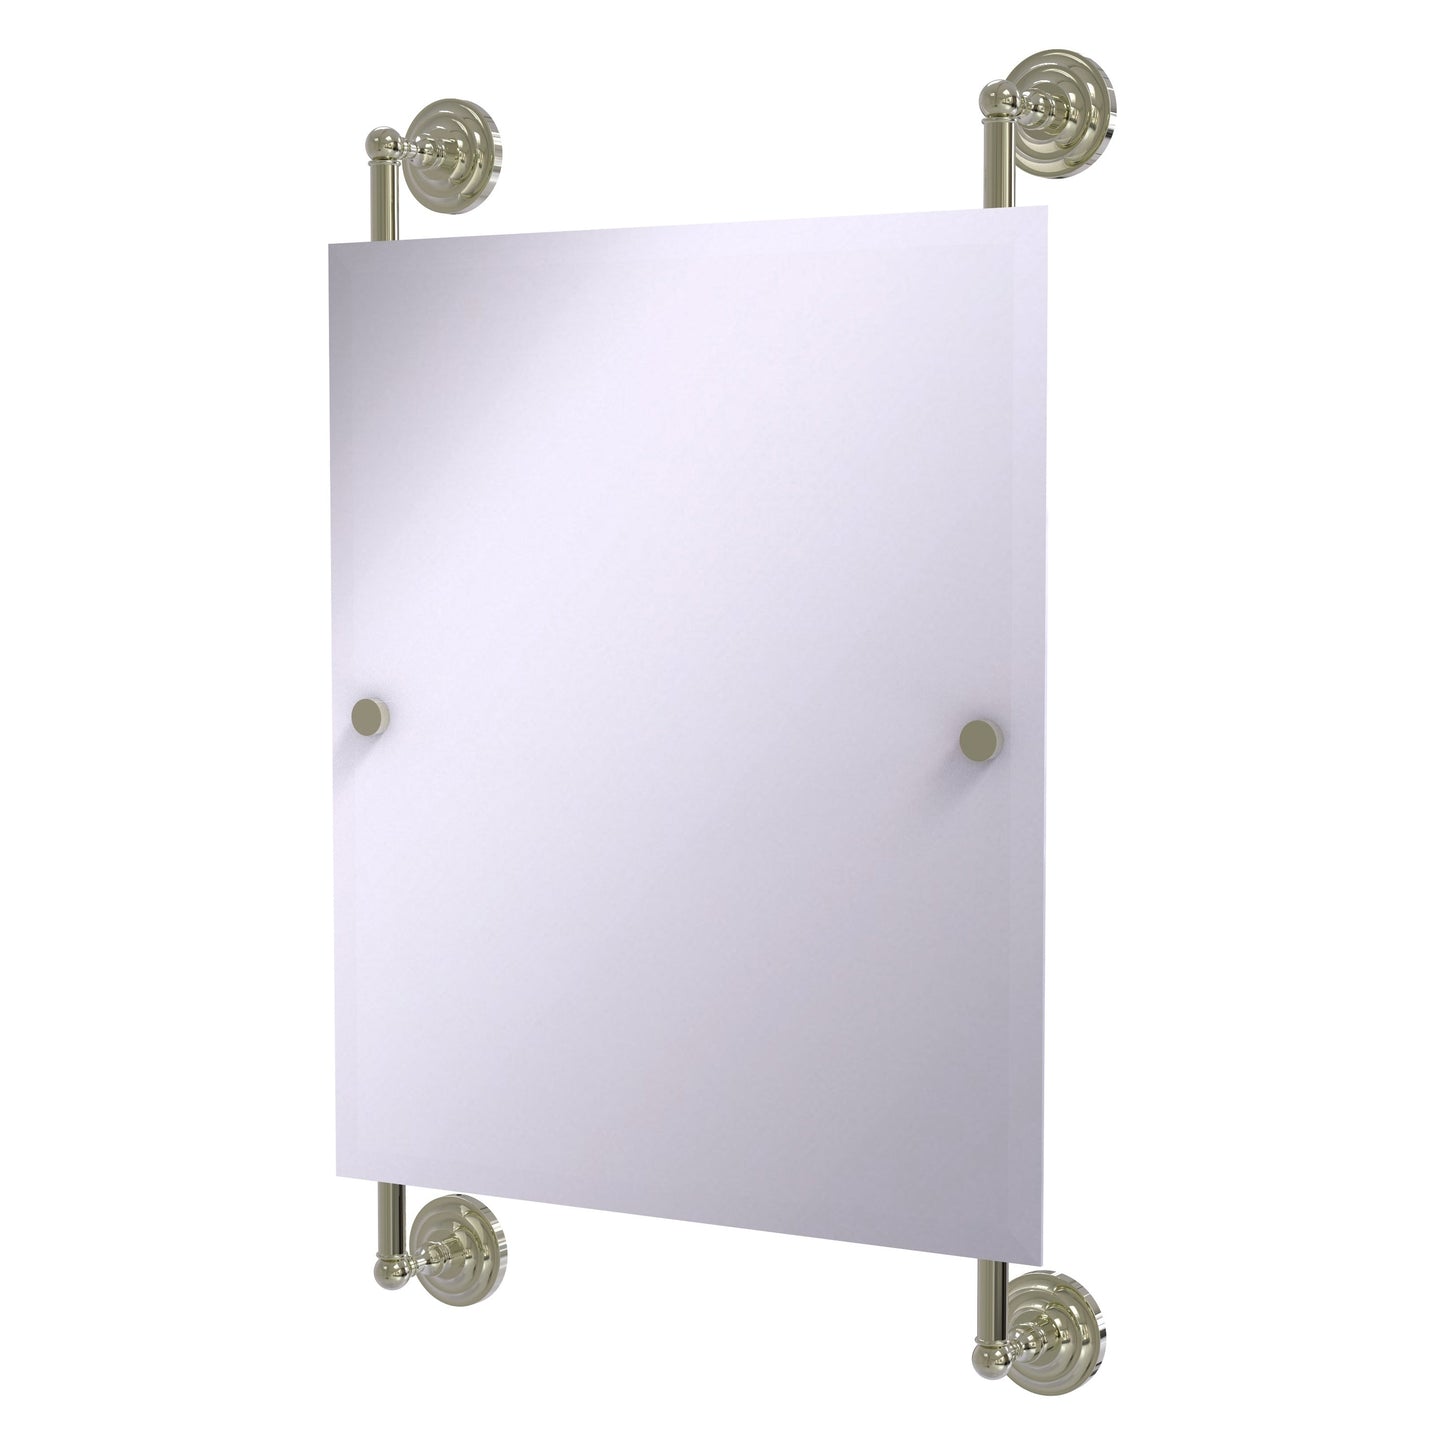 Allied Brass Que New 21" x 3.8" Polished Nickel Solid Brass Rectangular Frameless Rail Mounted Mirror